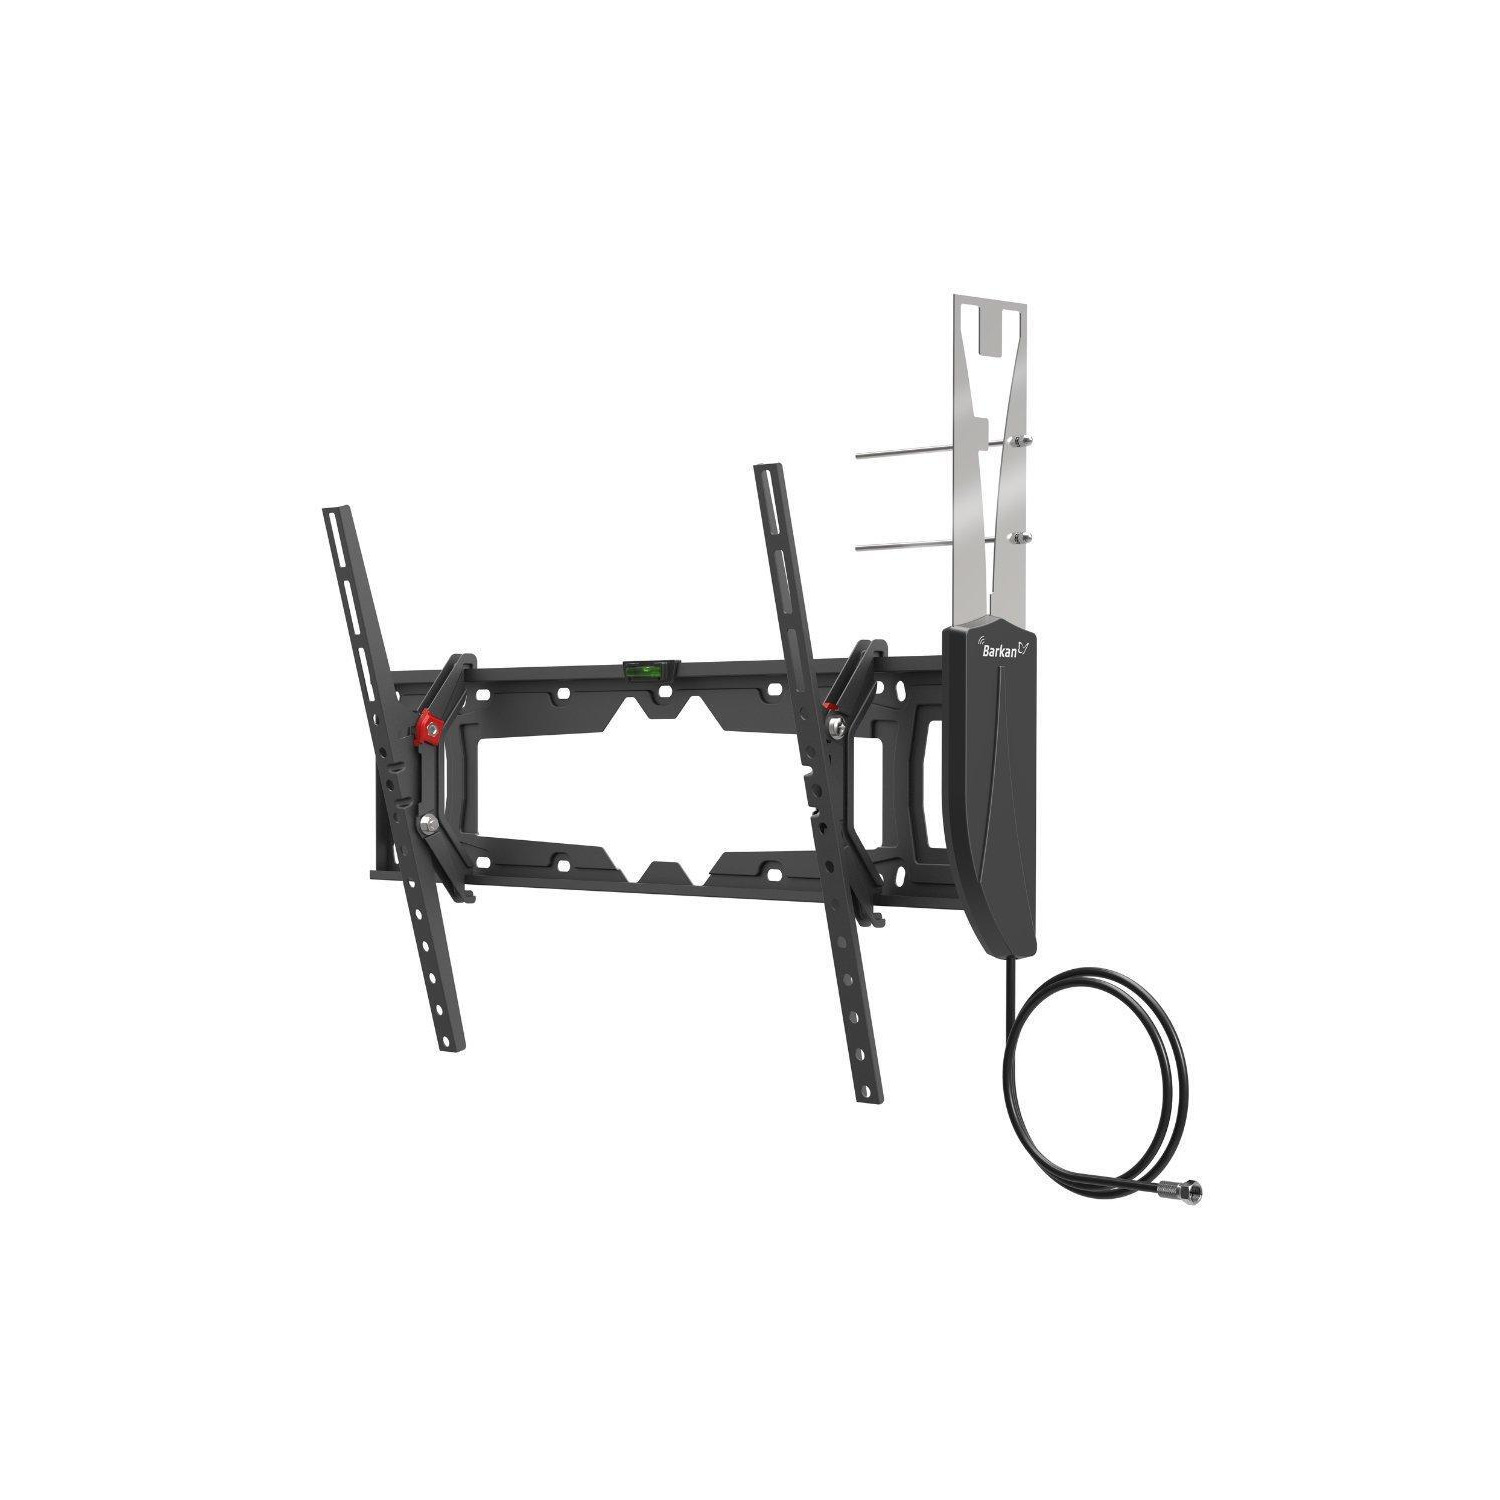 "19"" to 80"" Tilt TV Wall Mount Bracket with Integrated HDTV Antenna" - image 1